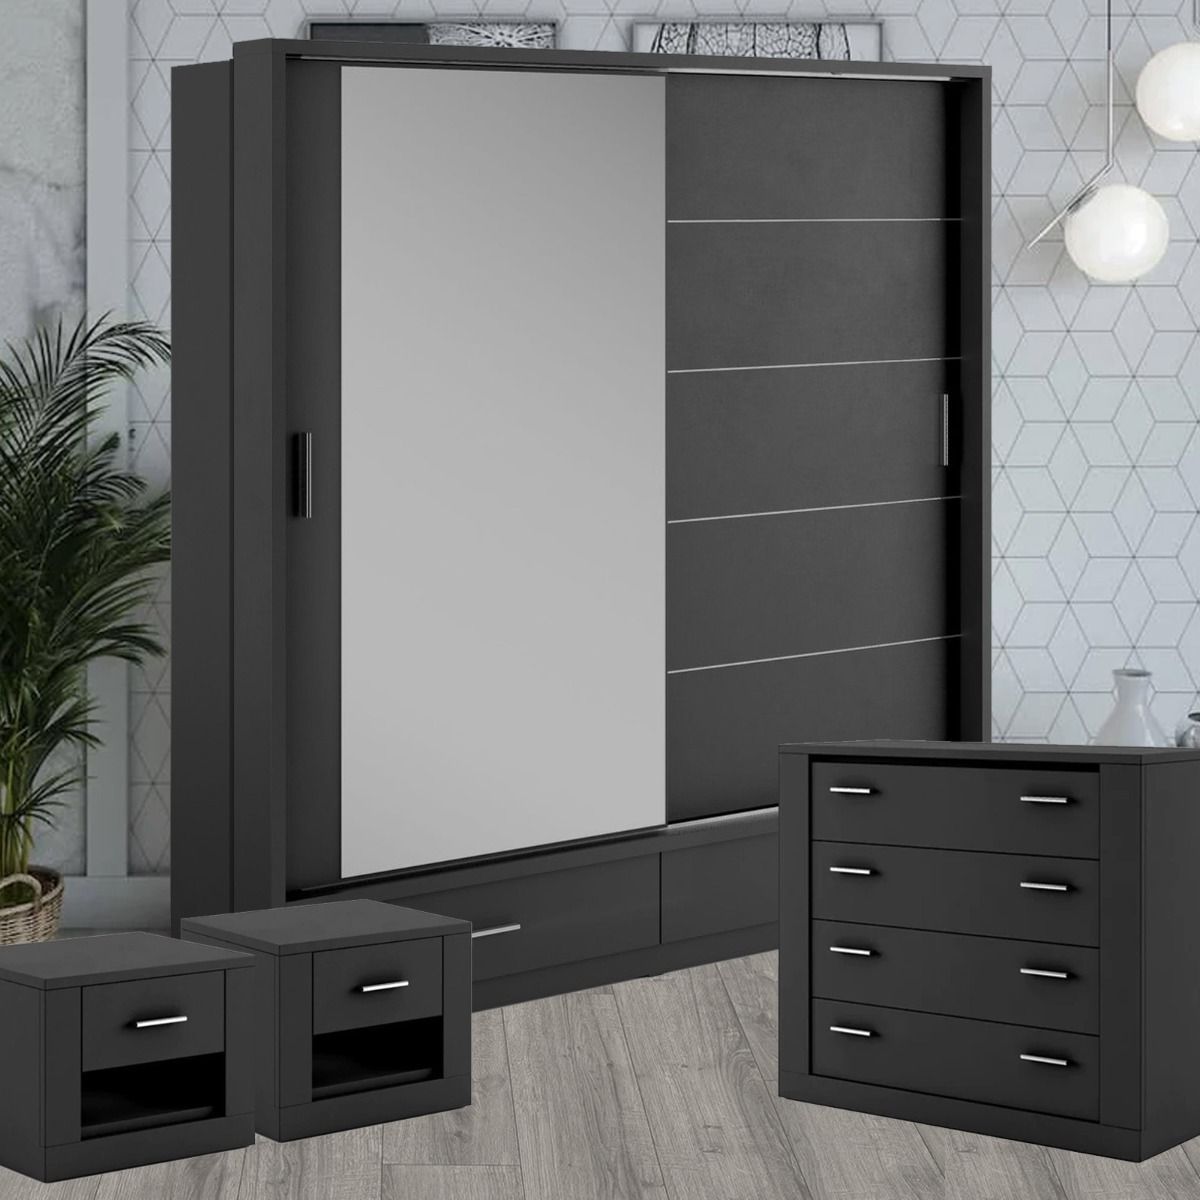 Bedroom Furniture Sets On Sale | Wardrobe Direct™ In Wardrobes And Chest Of Drawers Combined (Gallery 15 of 20)